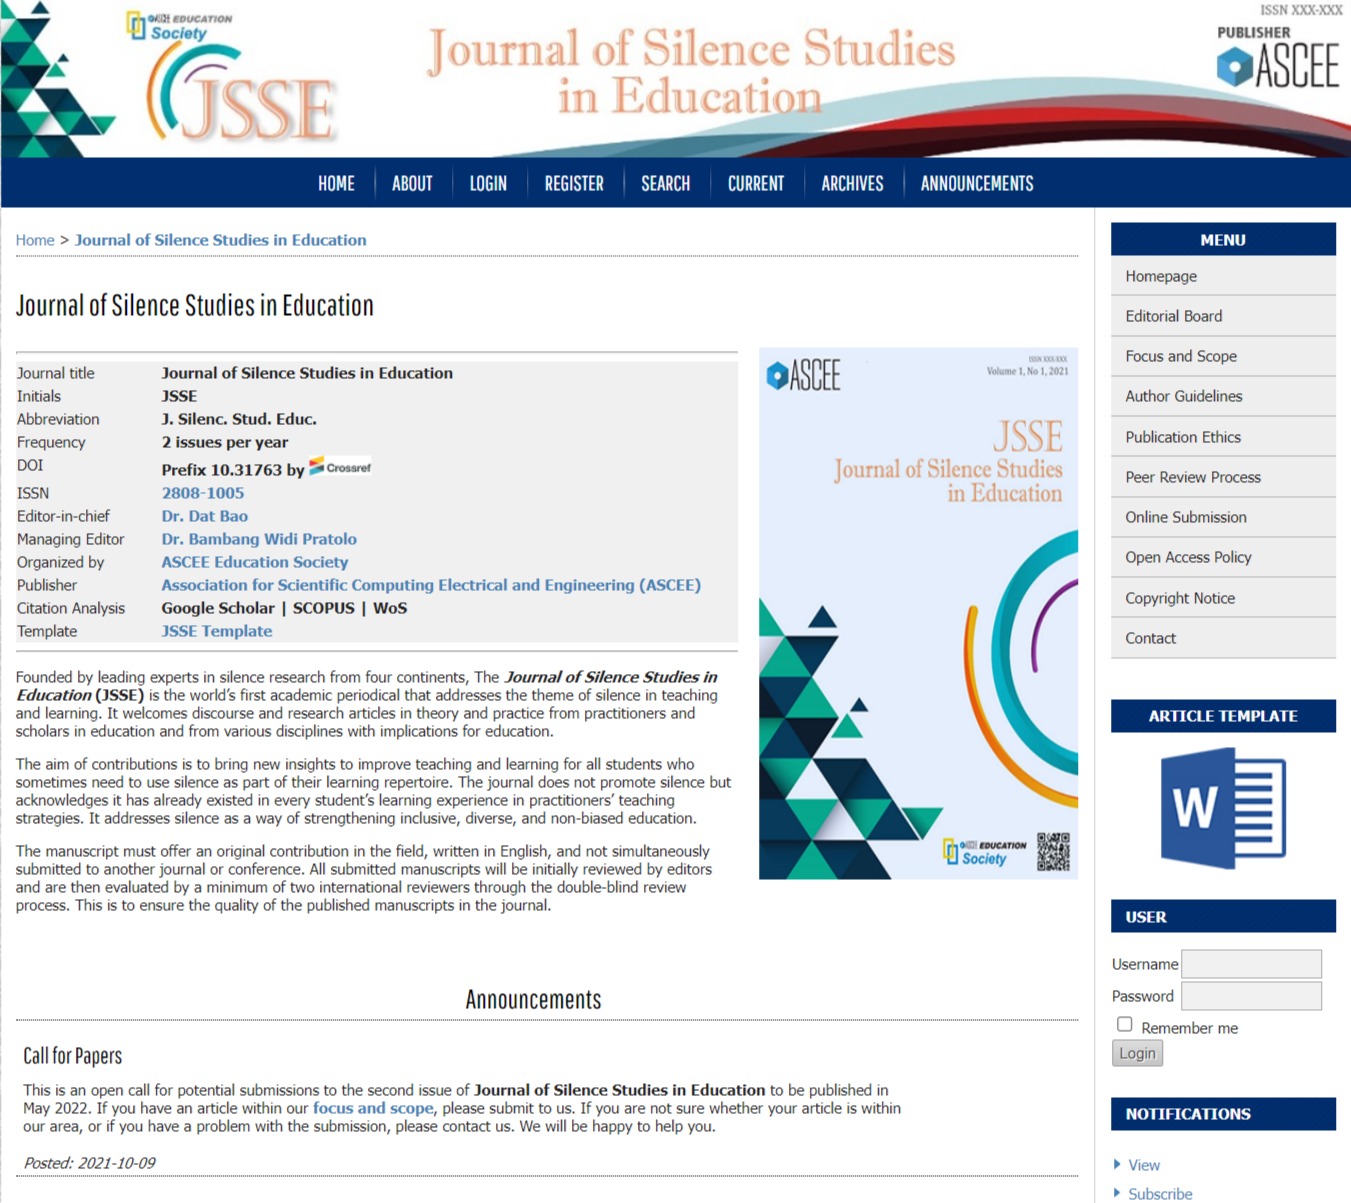 FireShot Capture 238 - Journal of Silence Studies in Education - jsse.ascee.org